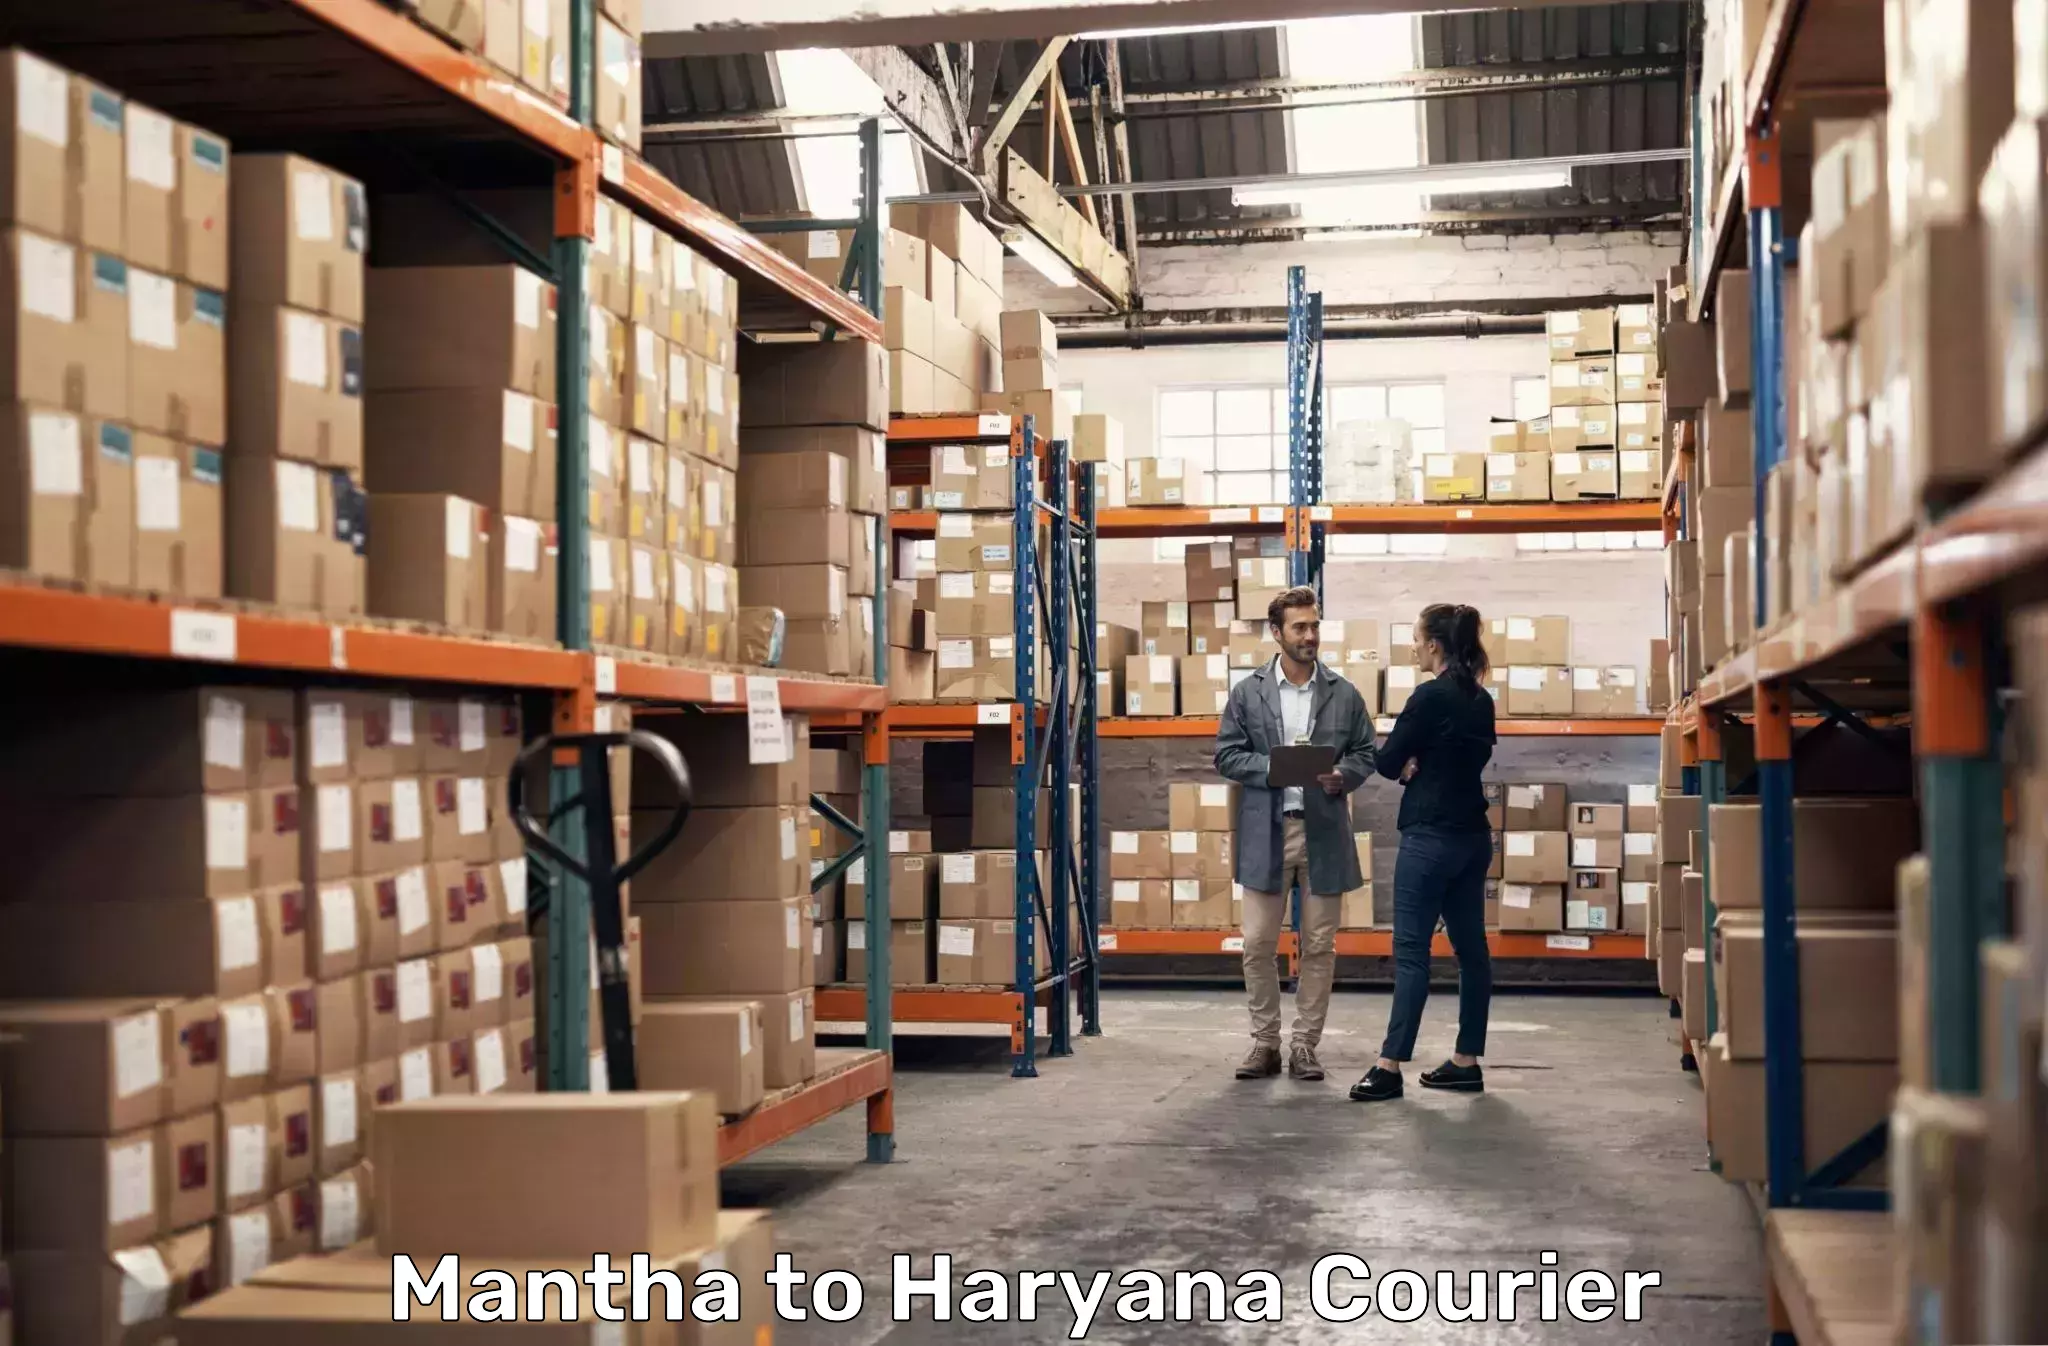 Courier insurance Mantha to NCR Haryana